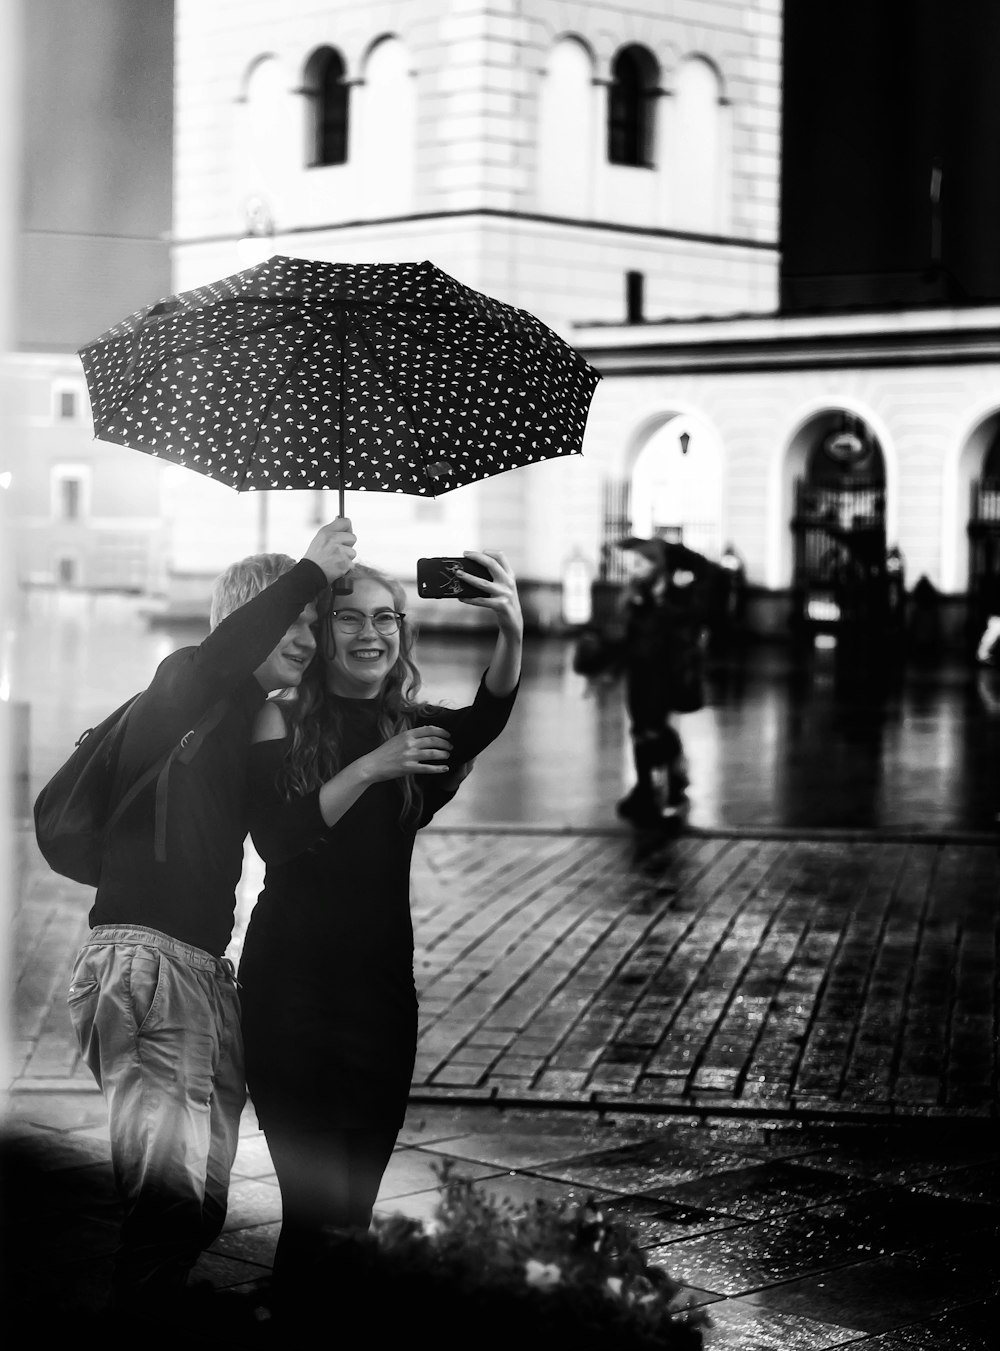 grayscale photo of woman in black dress holding umbrella